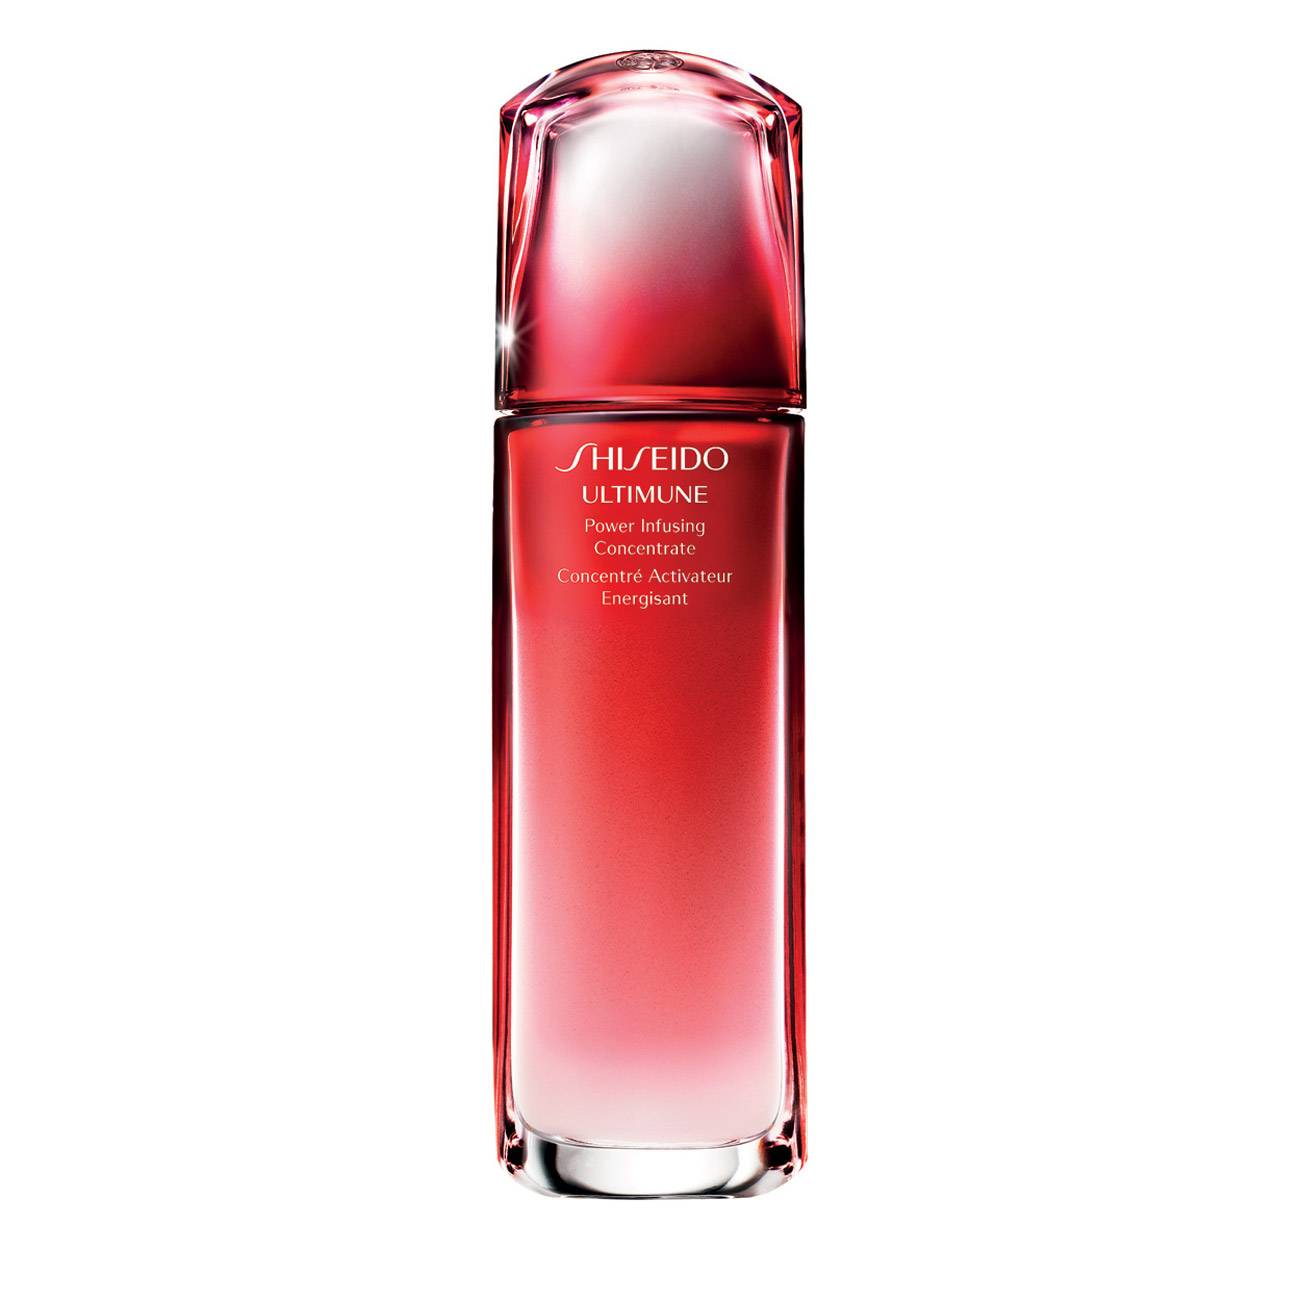 ULTIMUNE POWER INFUSING CONCENTRATE 100 ml 100